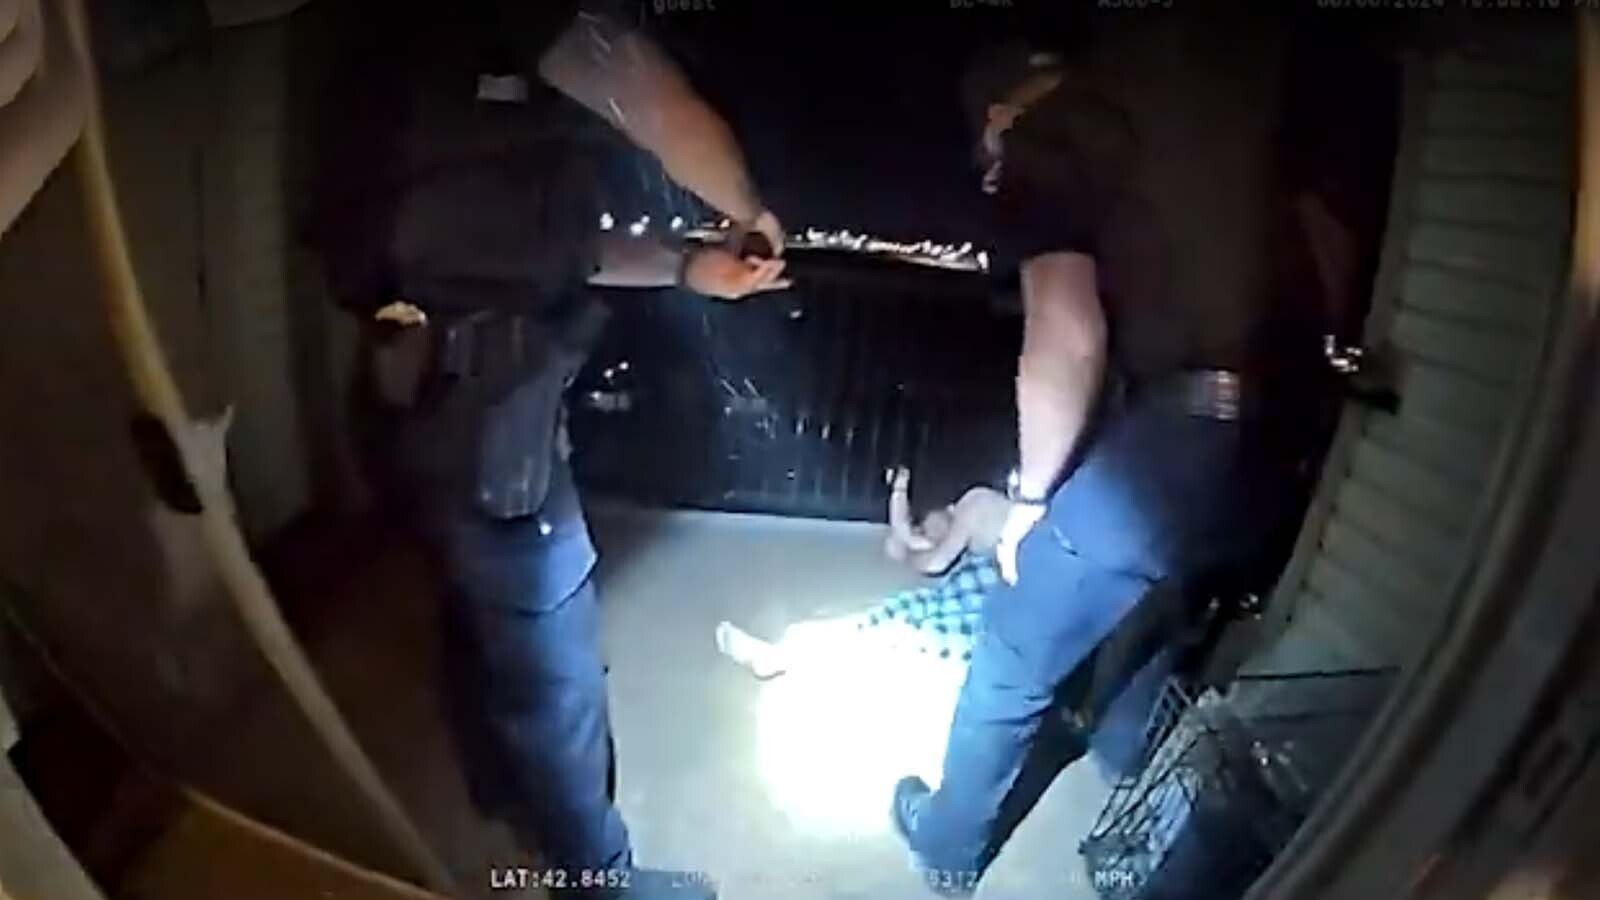 This image from body cam video released by the Casper Police Department shows the moments right after an officer fired seven shots at suspect Trae Spurlock, hitting him six times. Spurlock's face has been intentionally blurred.